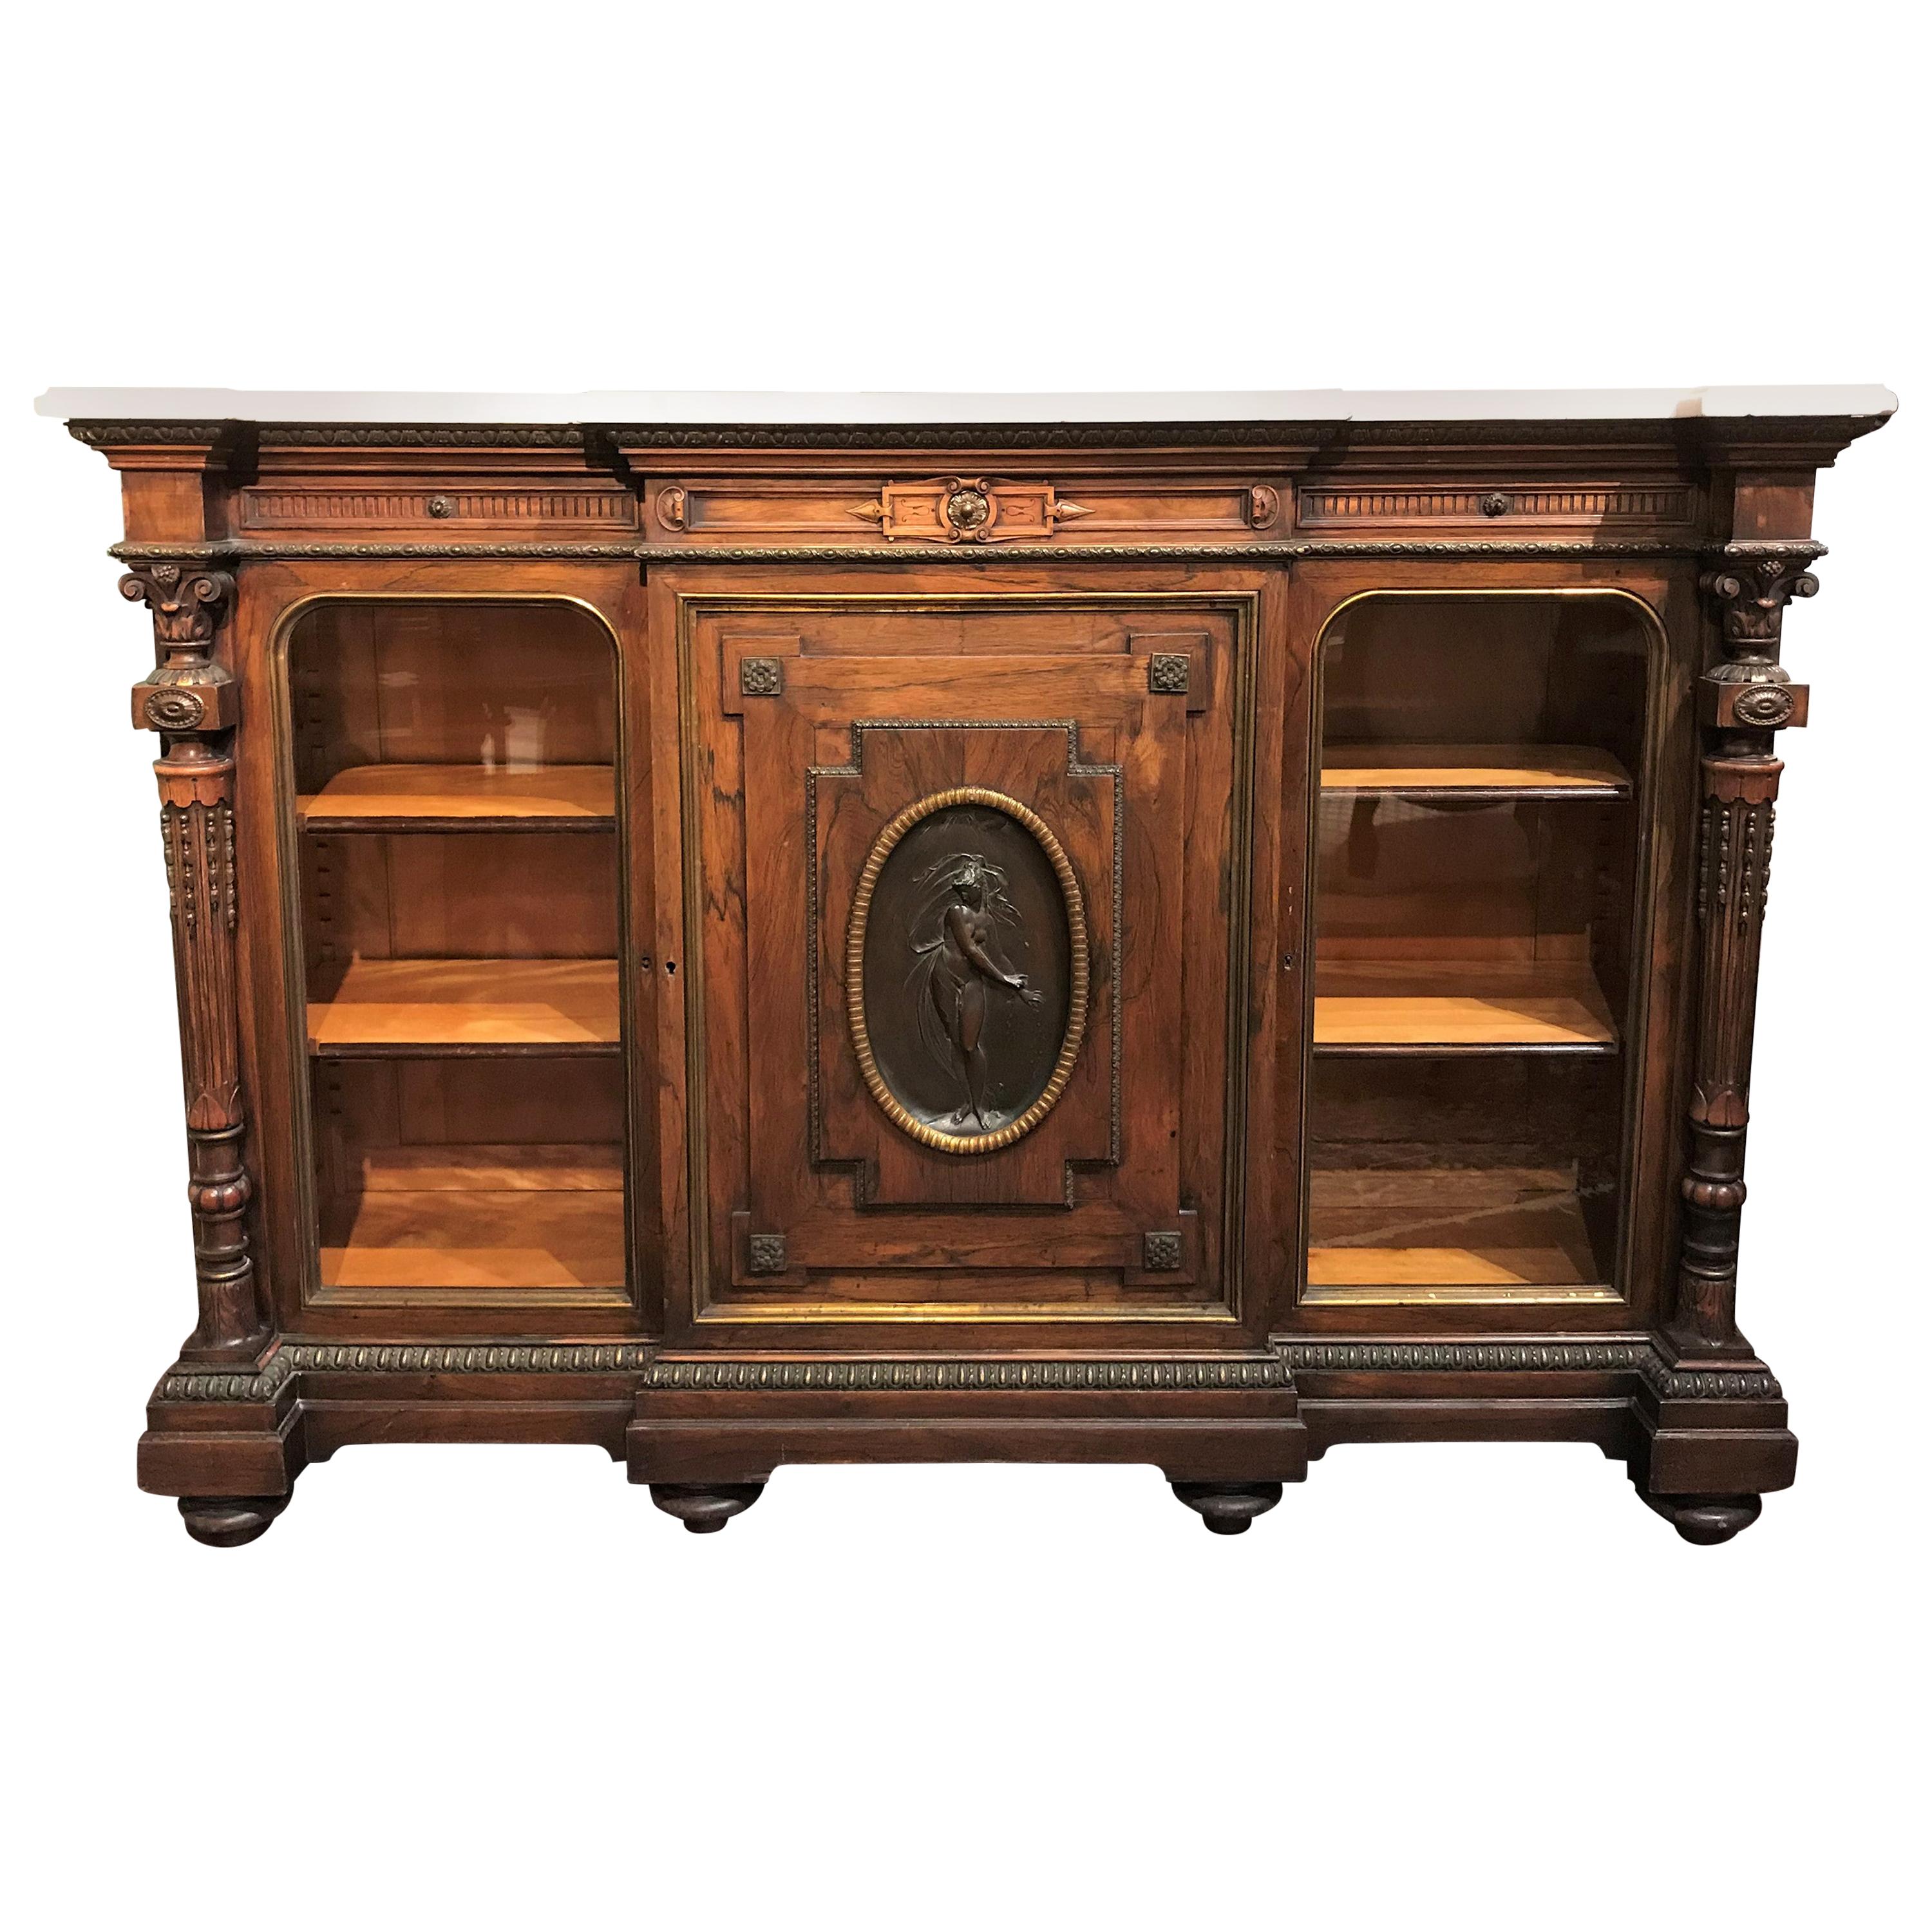 19th Century Rosewood and Ormolu Credenza with Conforming Marble Top